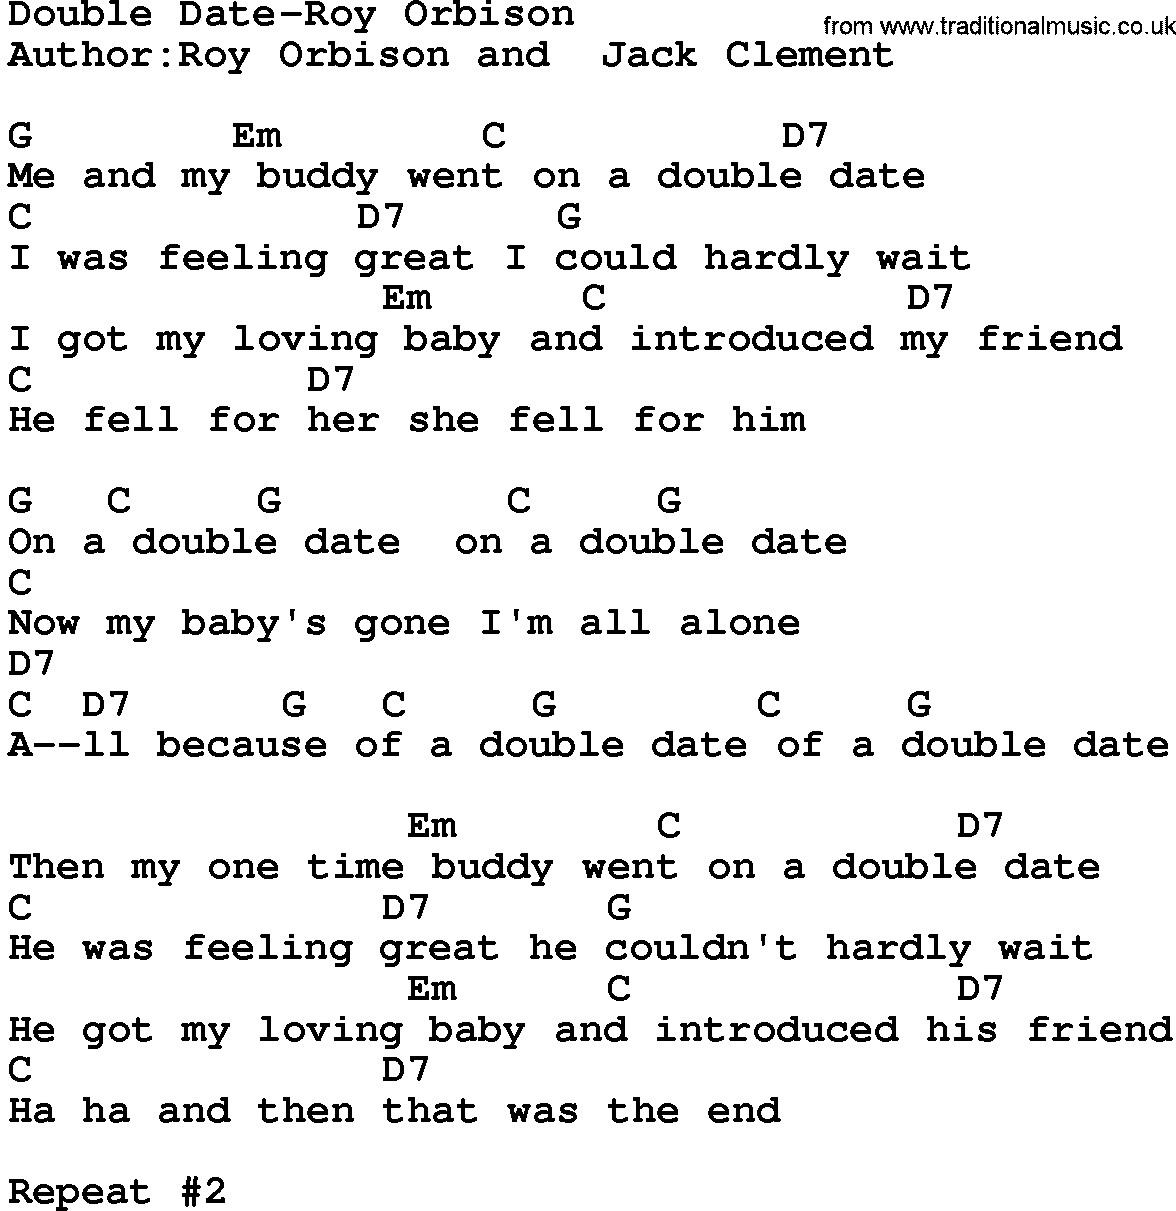 Country music song: Double Date-Roy Orbison lyrics and chords